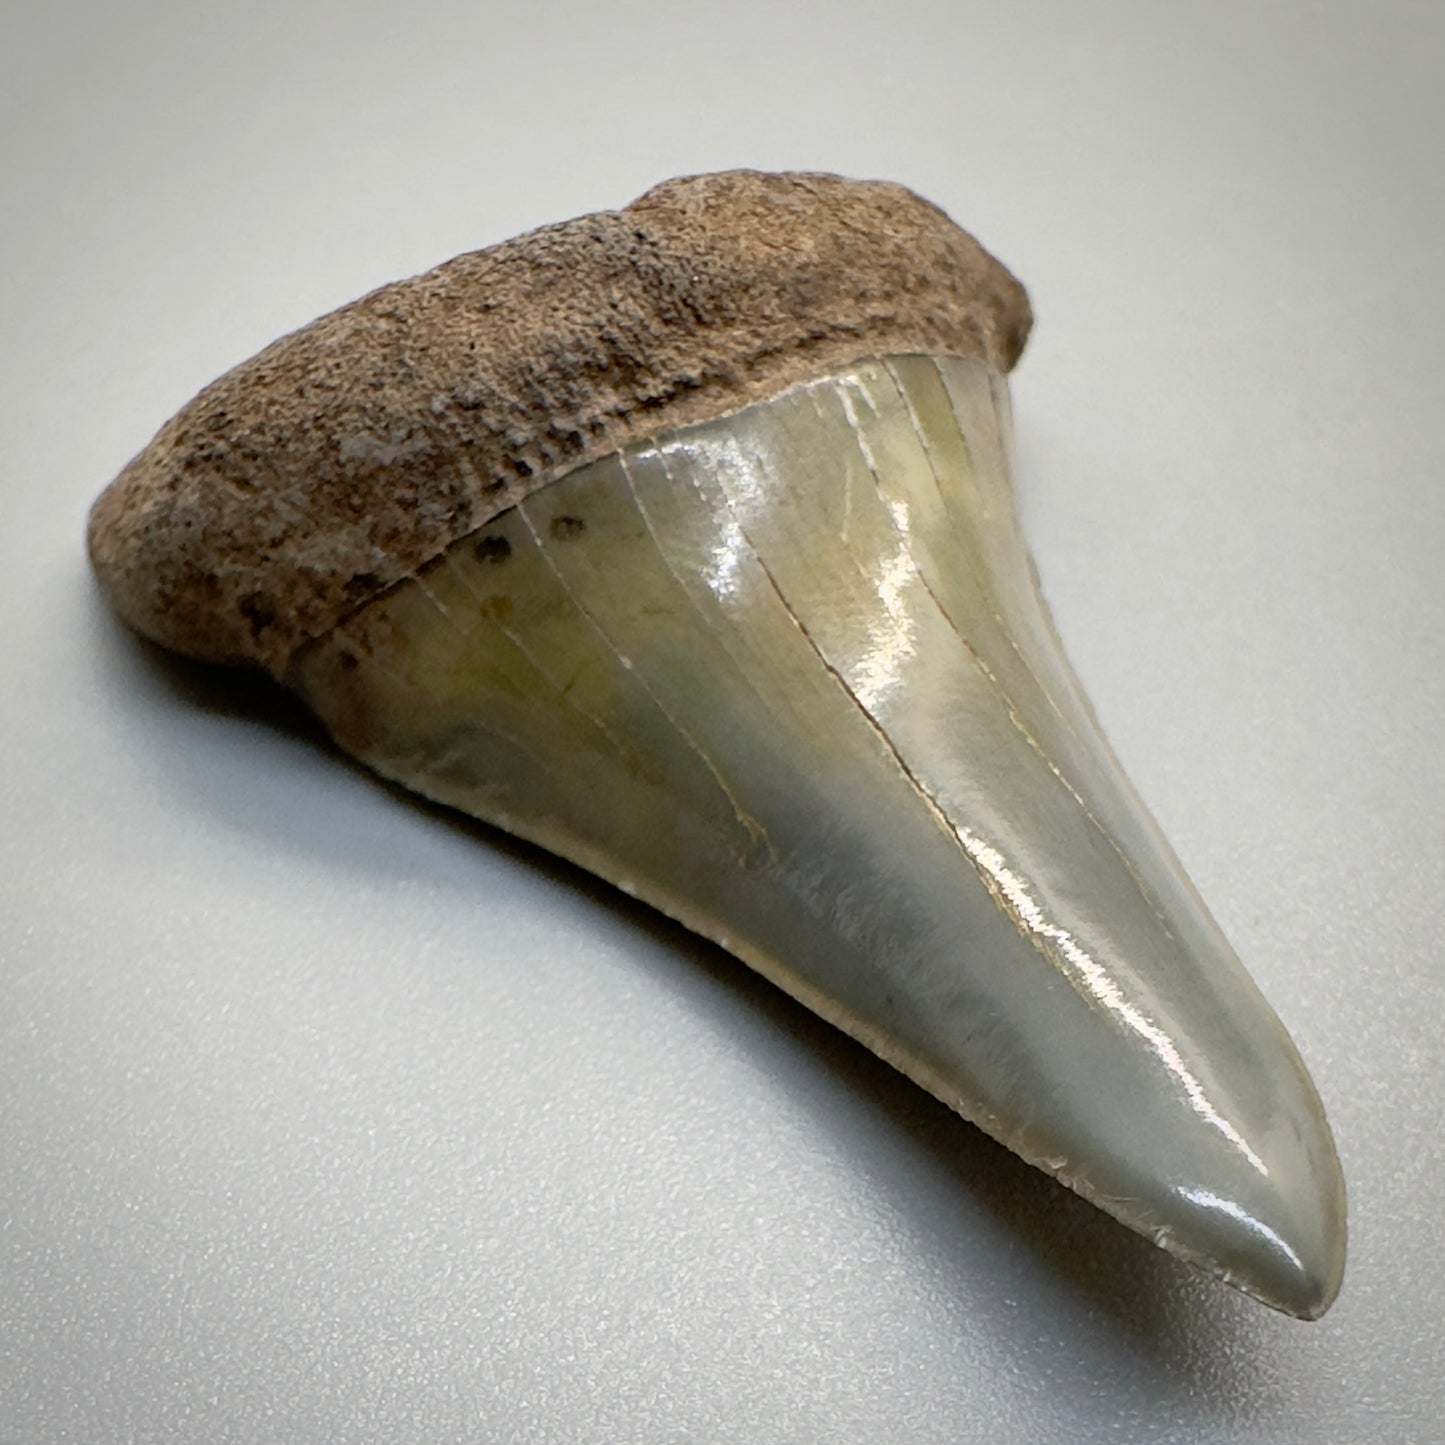 1.96 inches colorful Extinct Mako - isurus hastalis shark tooth from southeast, USA M510 front left